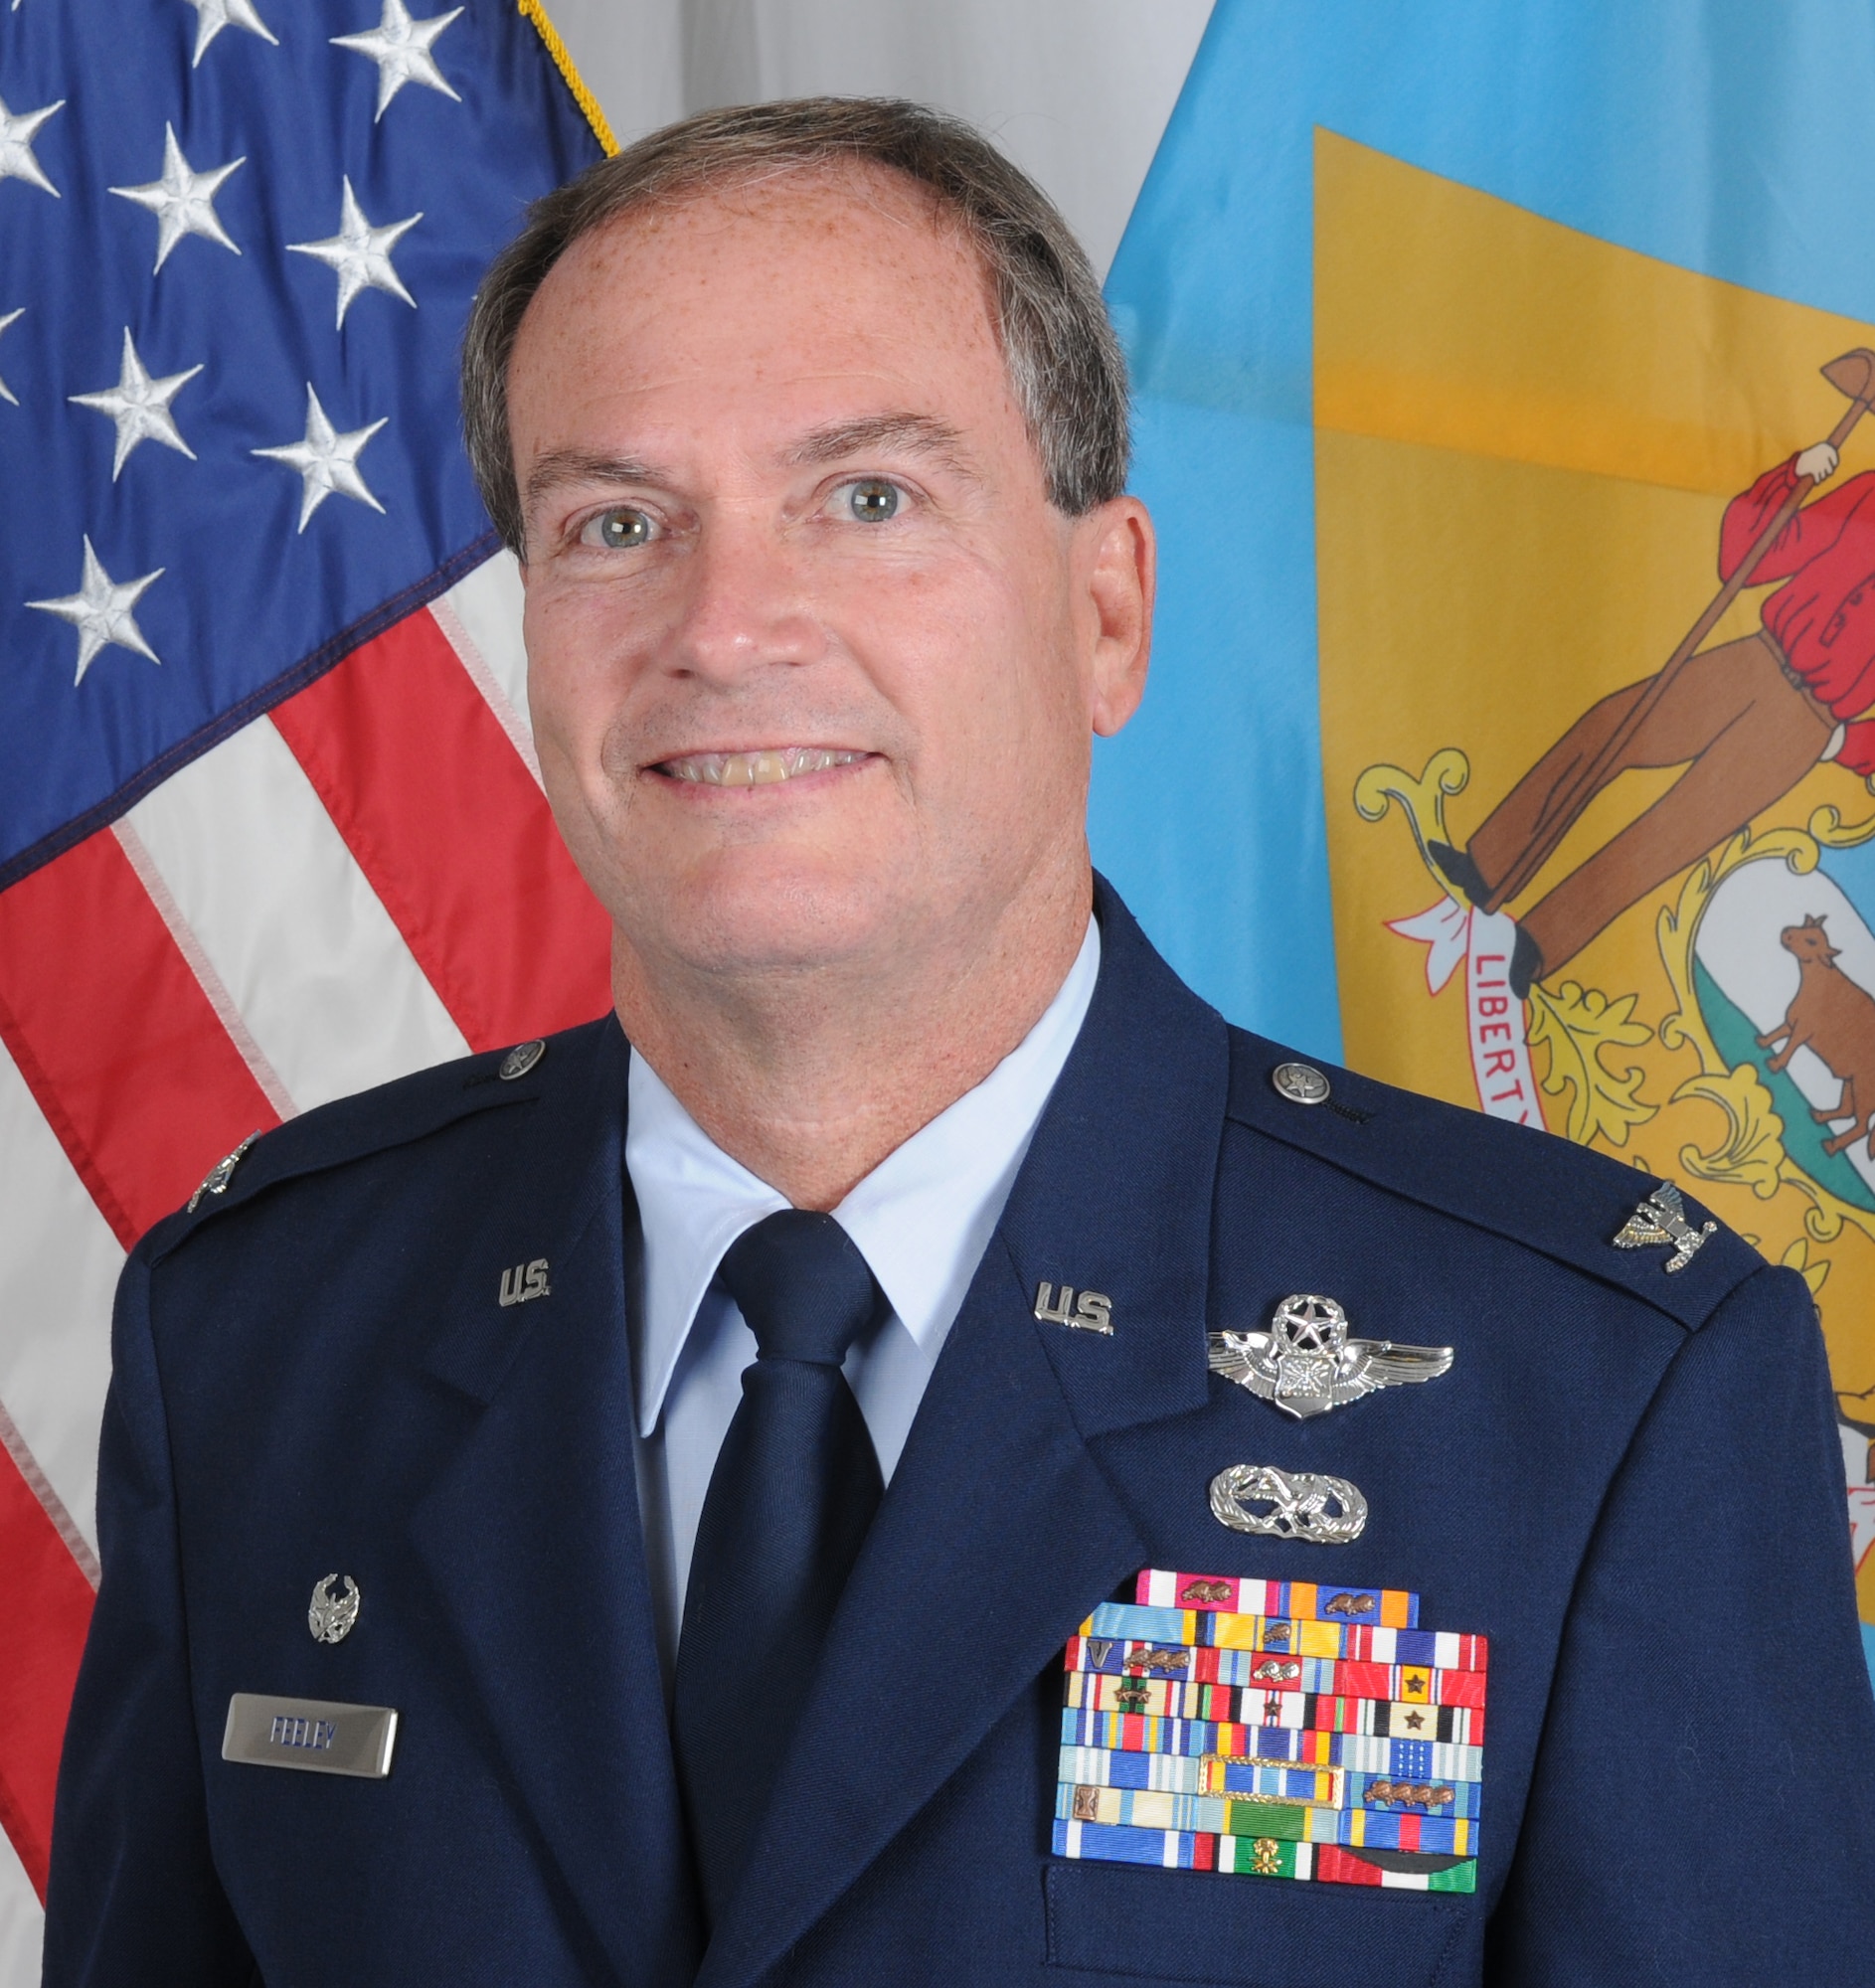 U.S. Air Force Colonel Michael J. Feeley, commander, 166th Airlift Wing, Delaware Air National Guard (U.S. Air Force photo/Tech. Sgt. Rob Meredith)